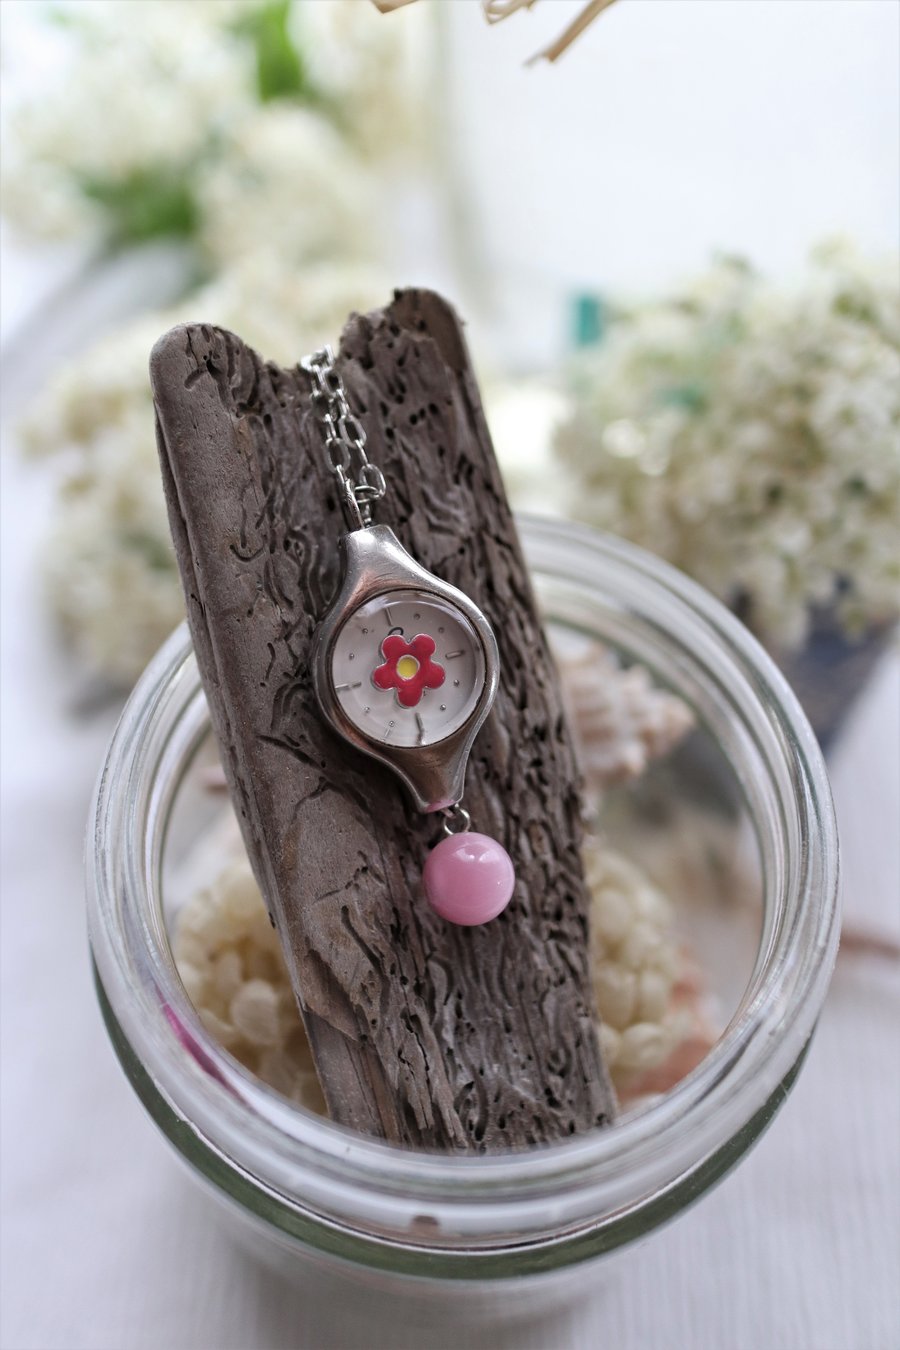 Upcycled ladies watch parts decorated with flower bead and cat eye bead necklace